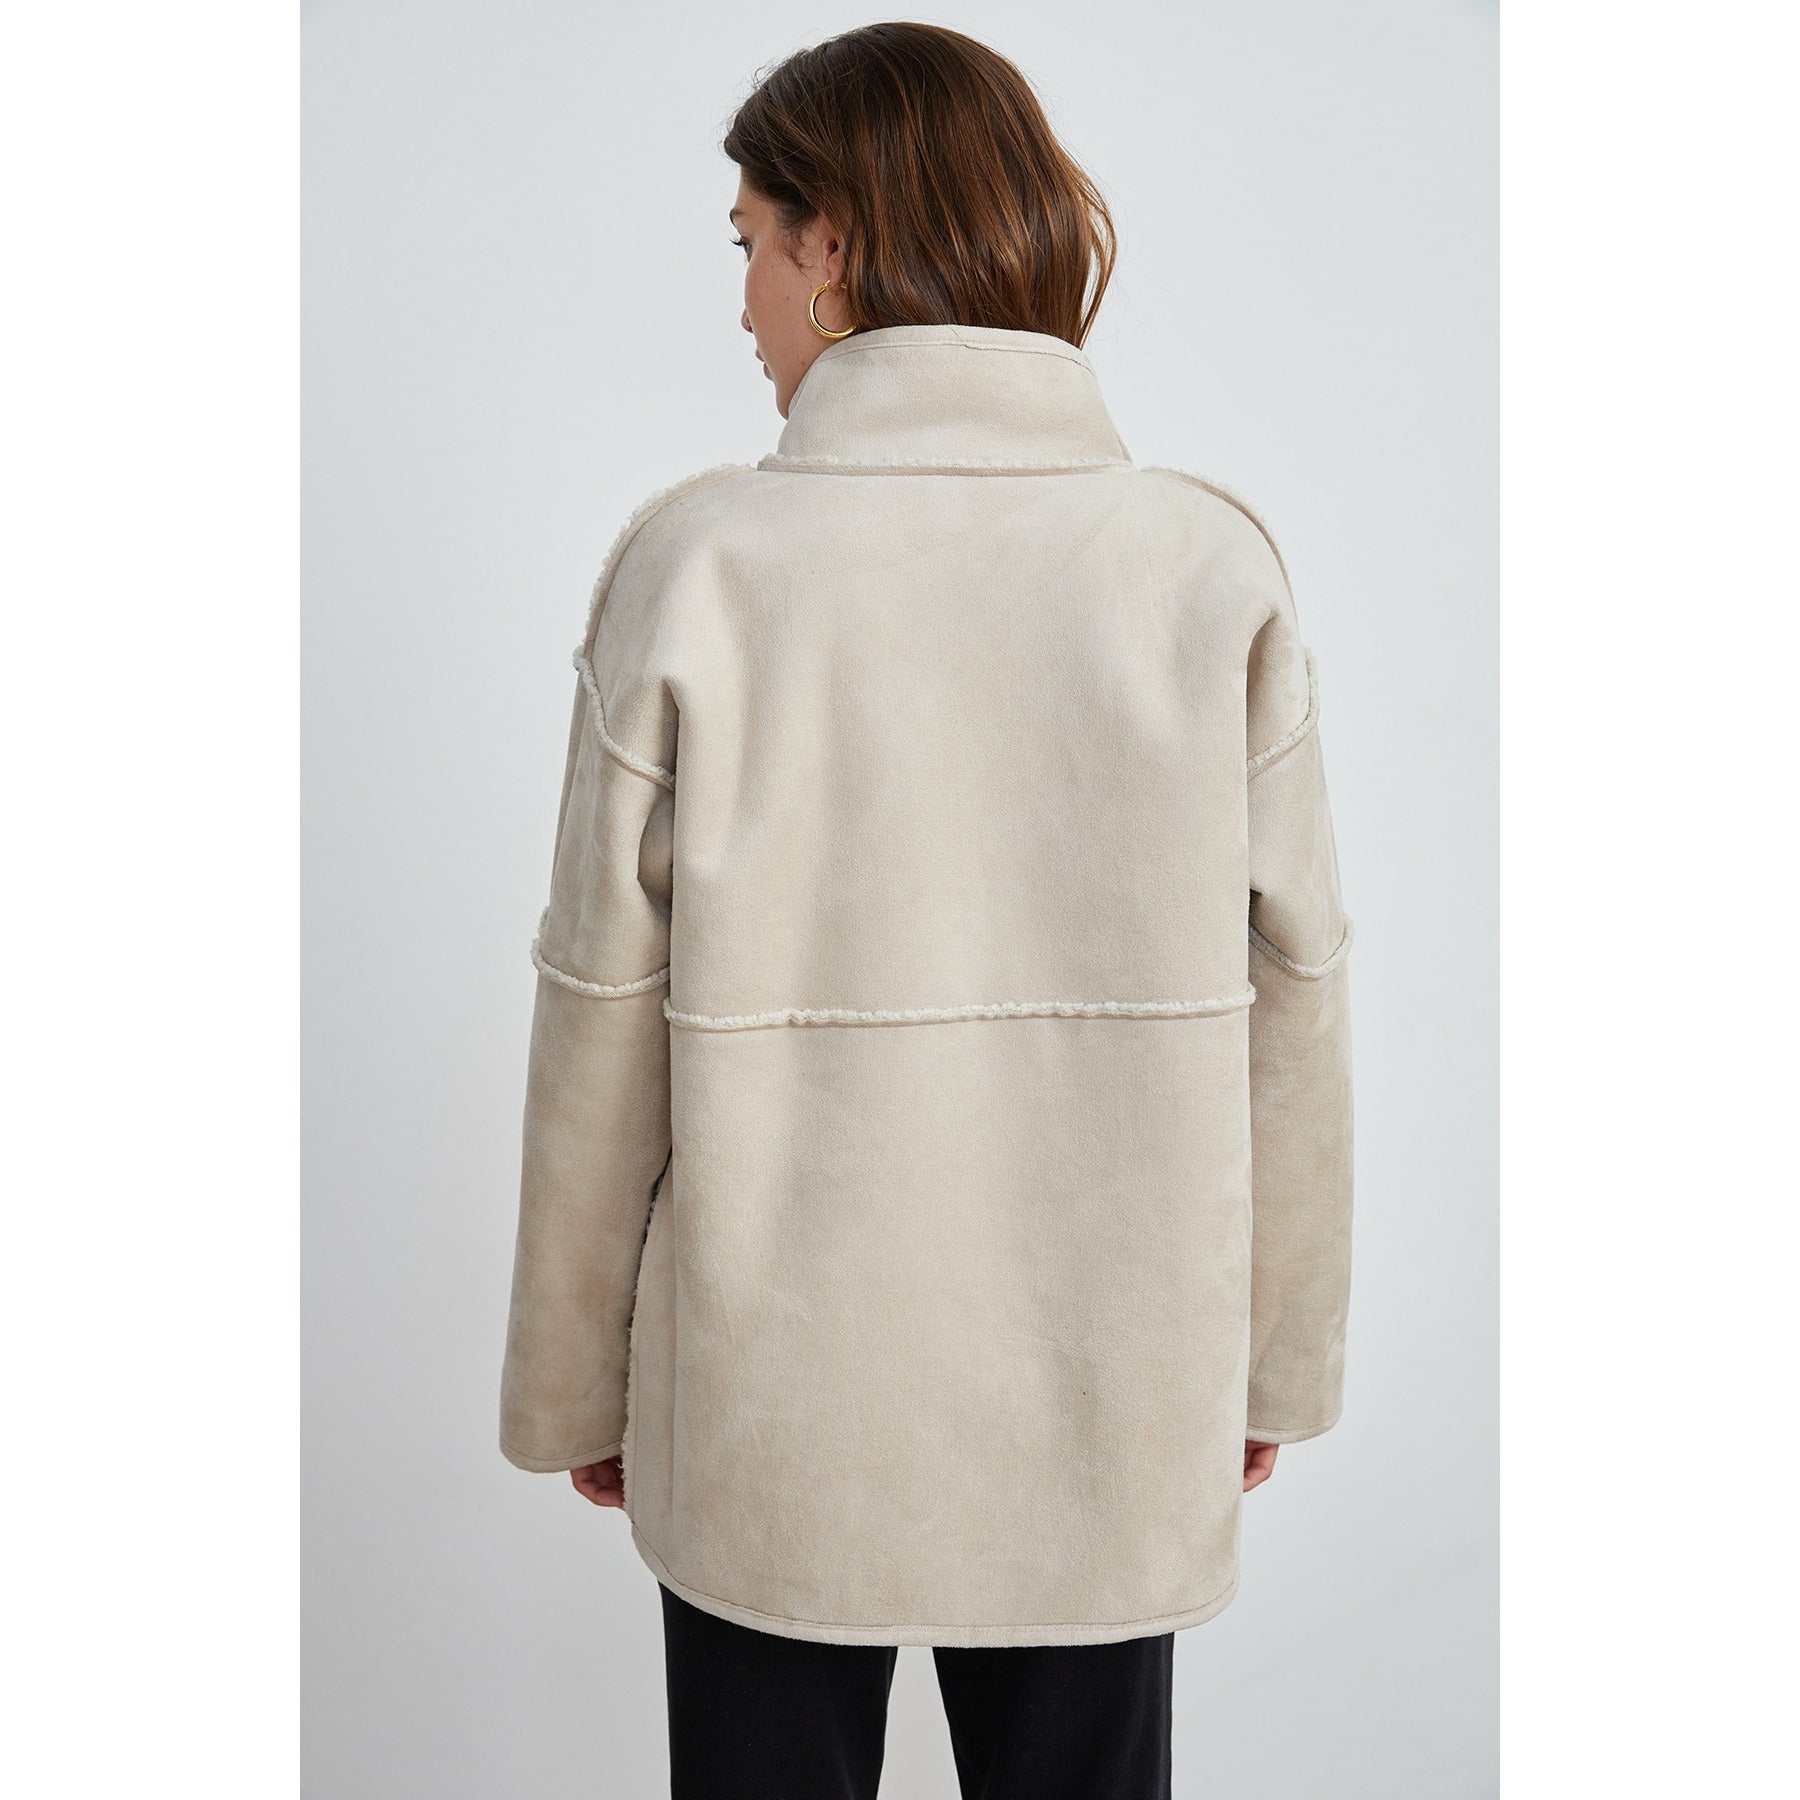 ALBANY LUX SHERPA REVERSIBLE JACKET